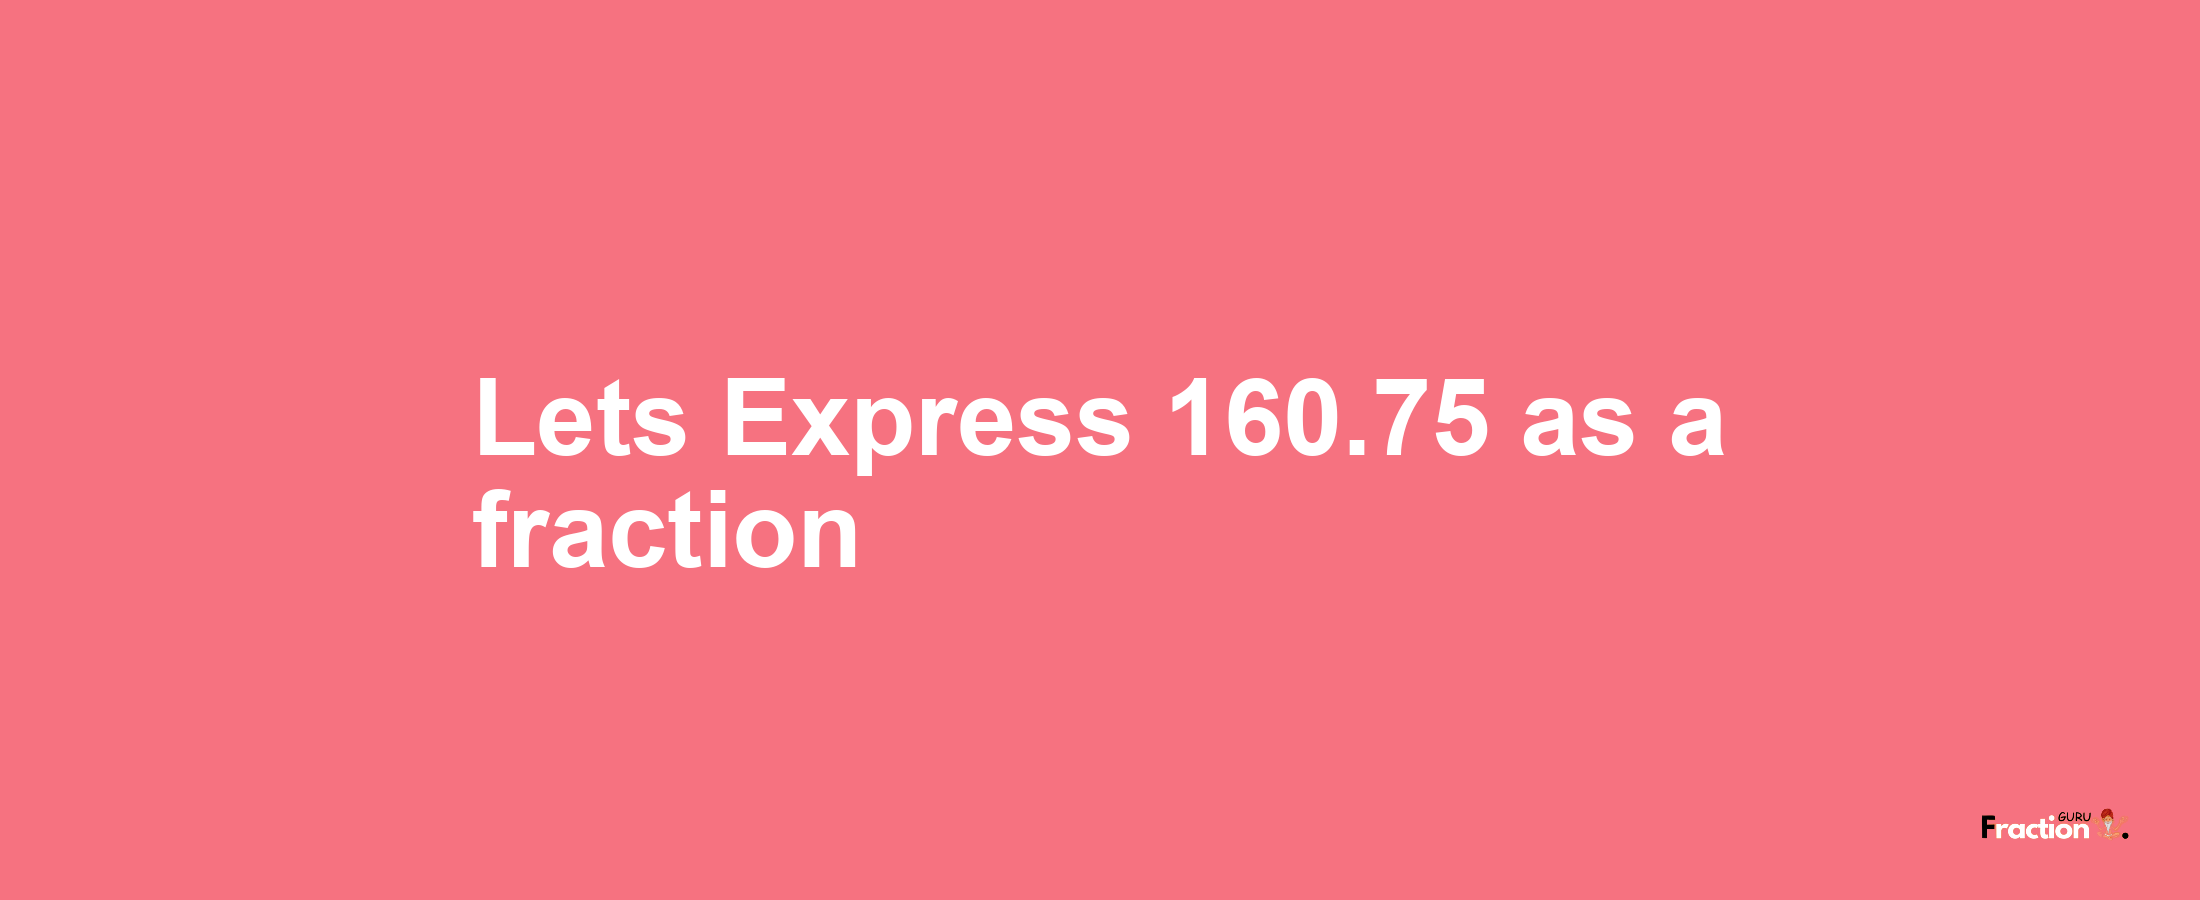 Lets Express 160.75 as afraction